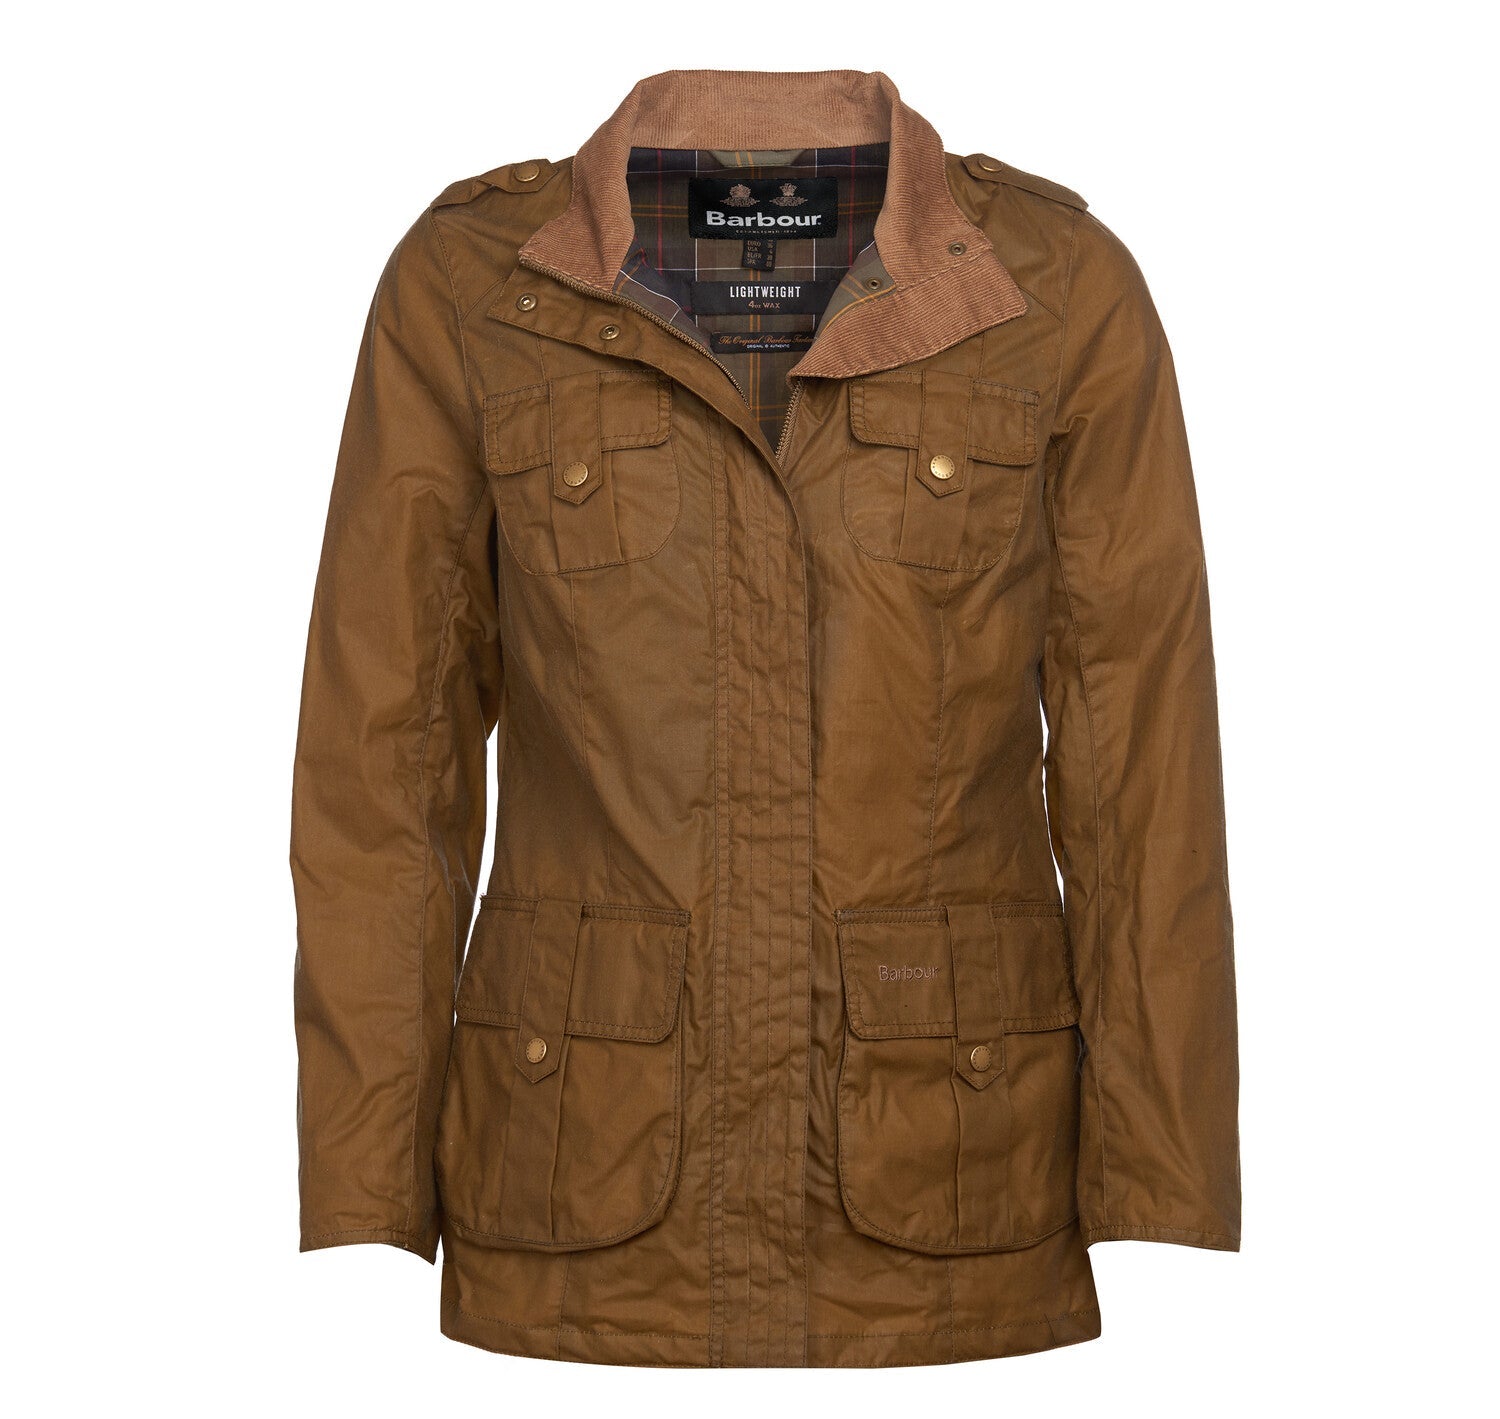 Barbour Defence Lightweight Wax Jacket - Sand/Classic